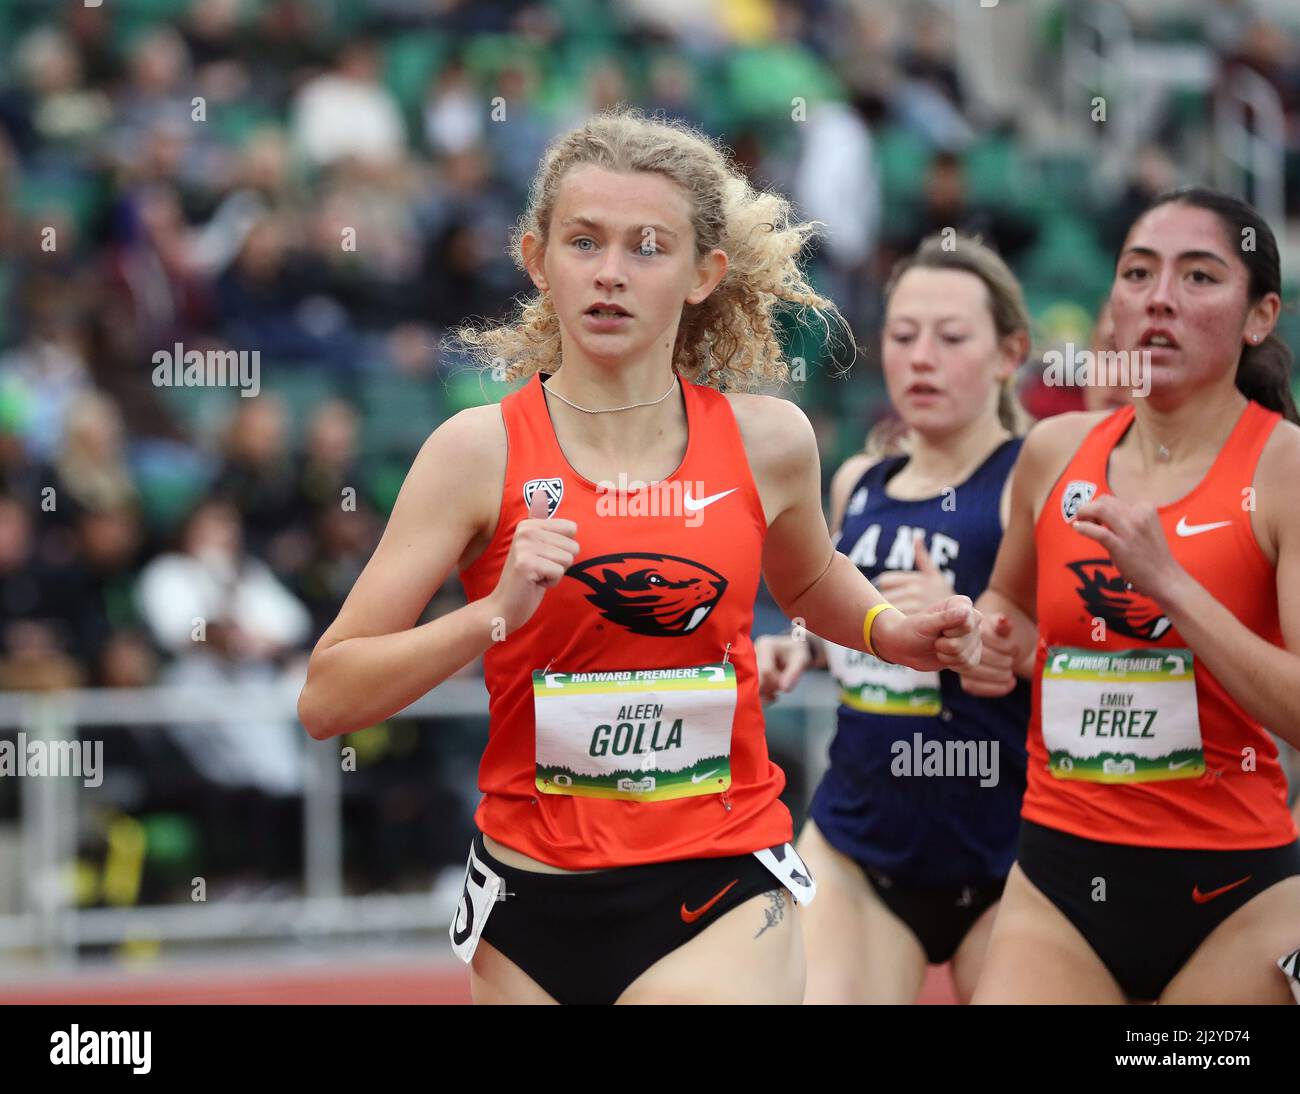 April 1, 2022: Aleen Golla of Oregon State University competes in the Women's 1500 Meter Run at the 2022 Hayward Premiere at Hayward Field, Eugene, OR Larry C. Lawson/Cal Sport Media Stock Photo